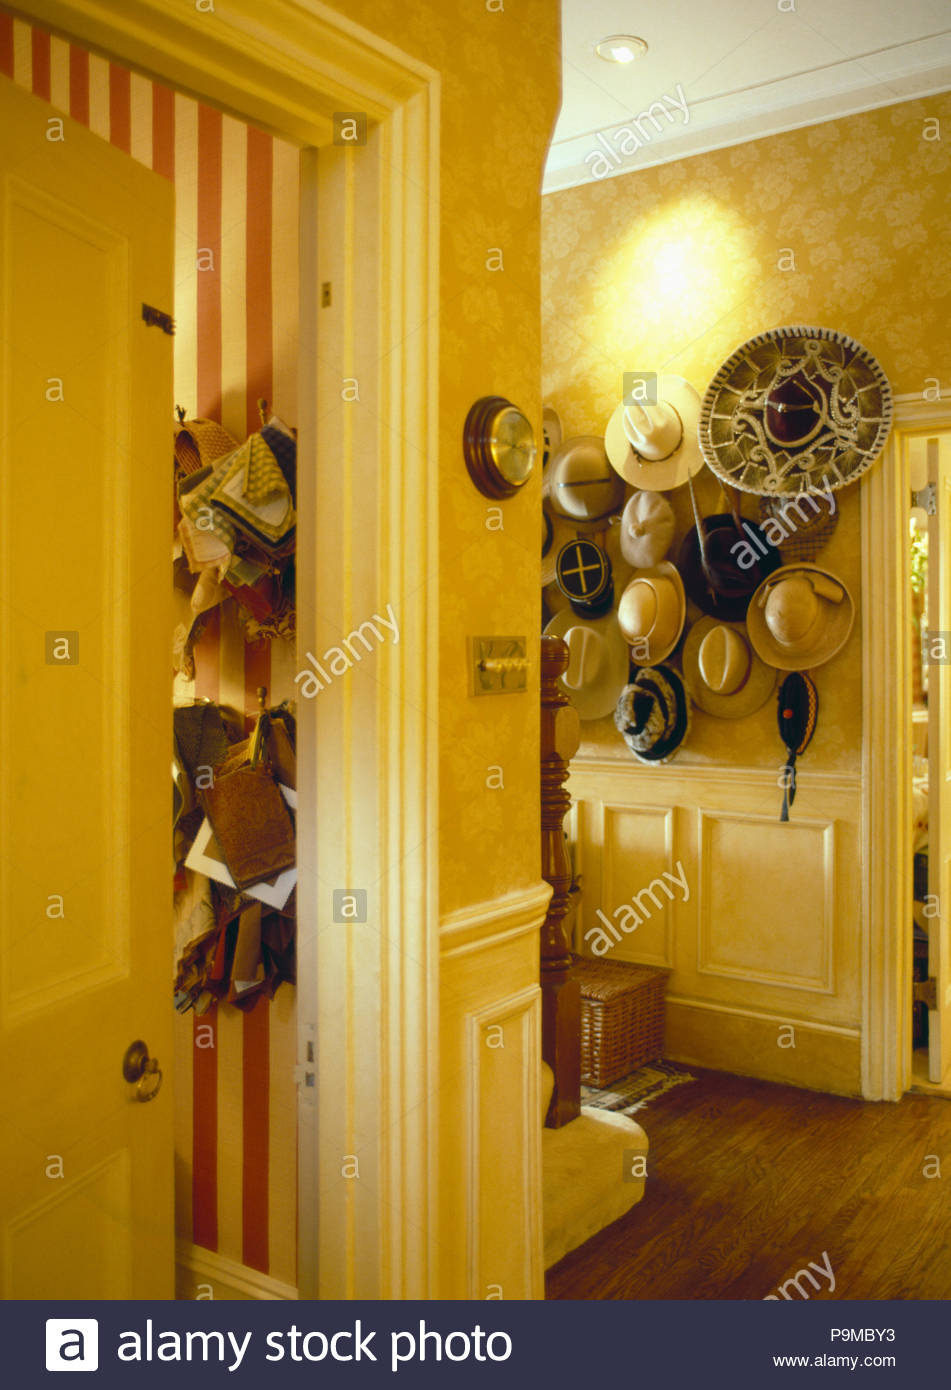 Patterned Wallpaper In Yellow Hall With Collection Of Hats On Wall